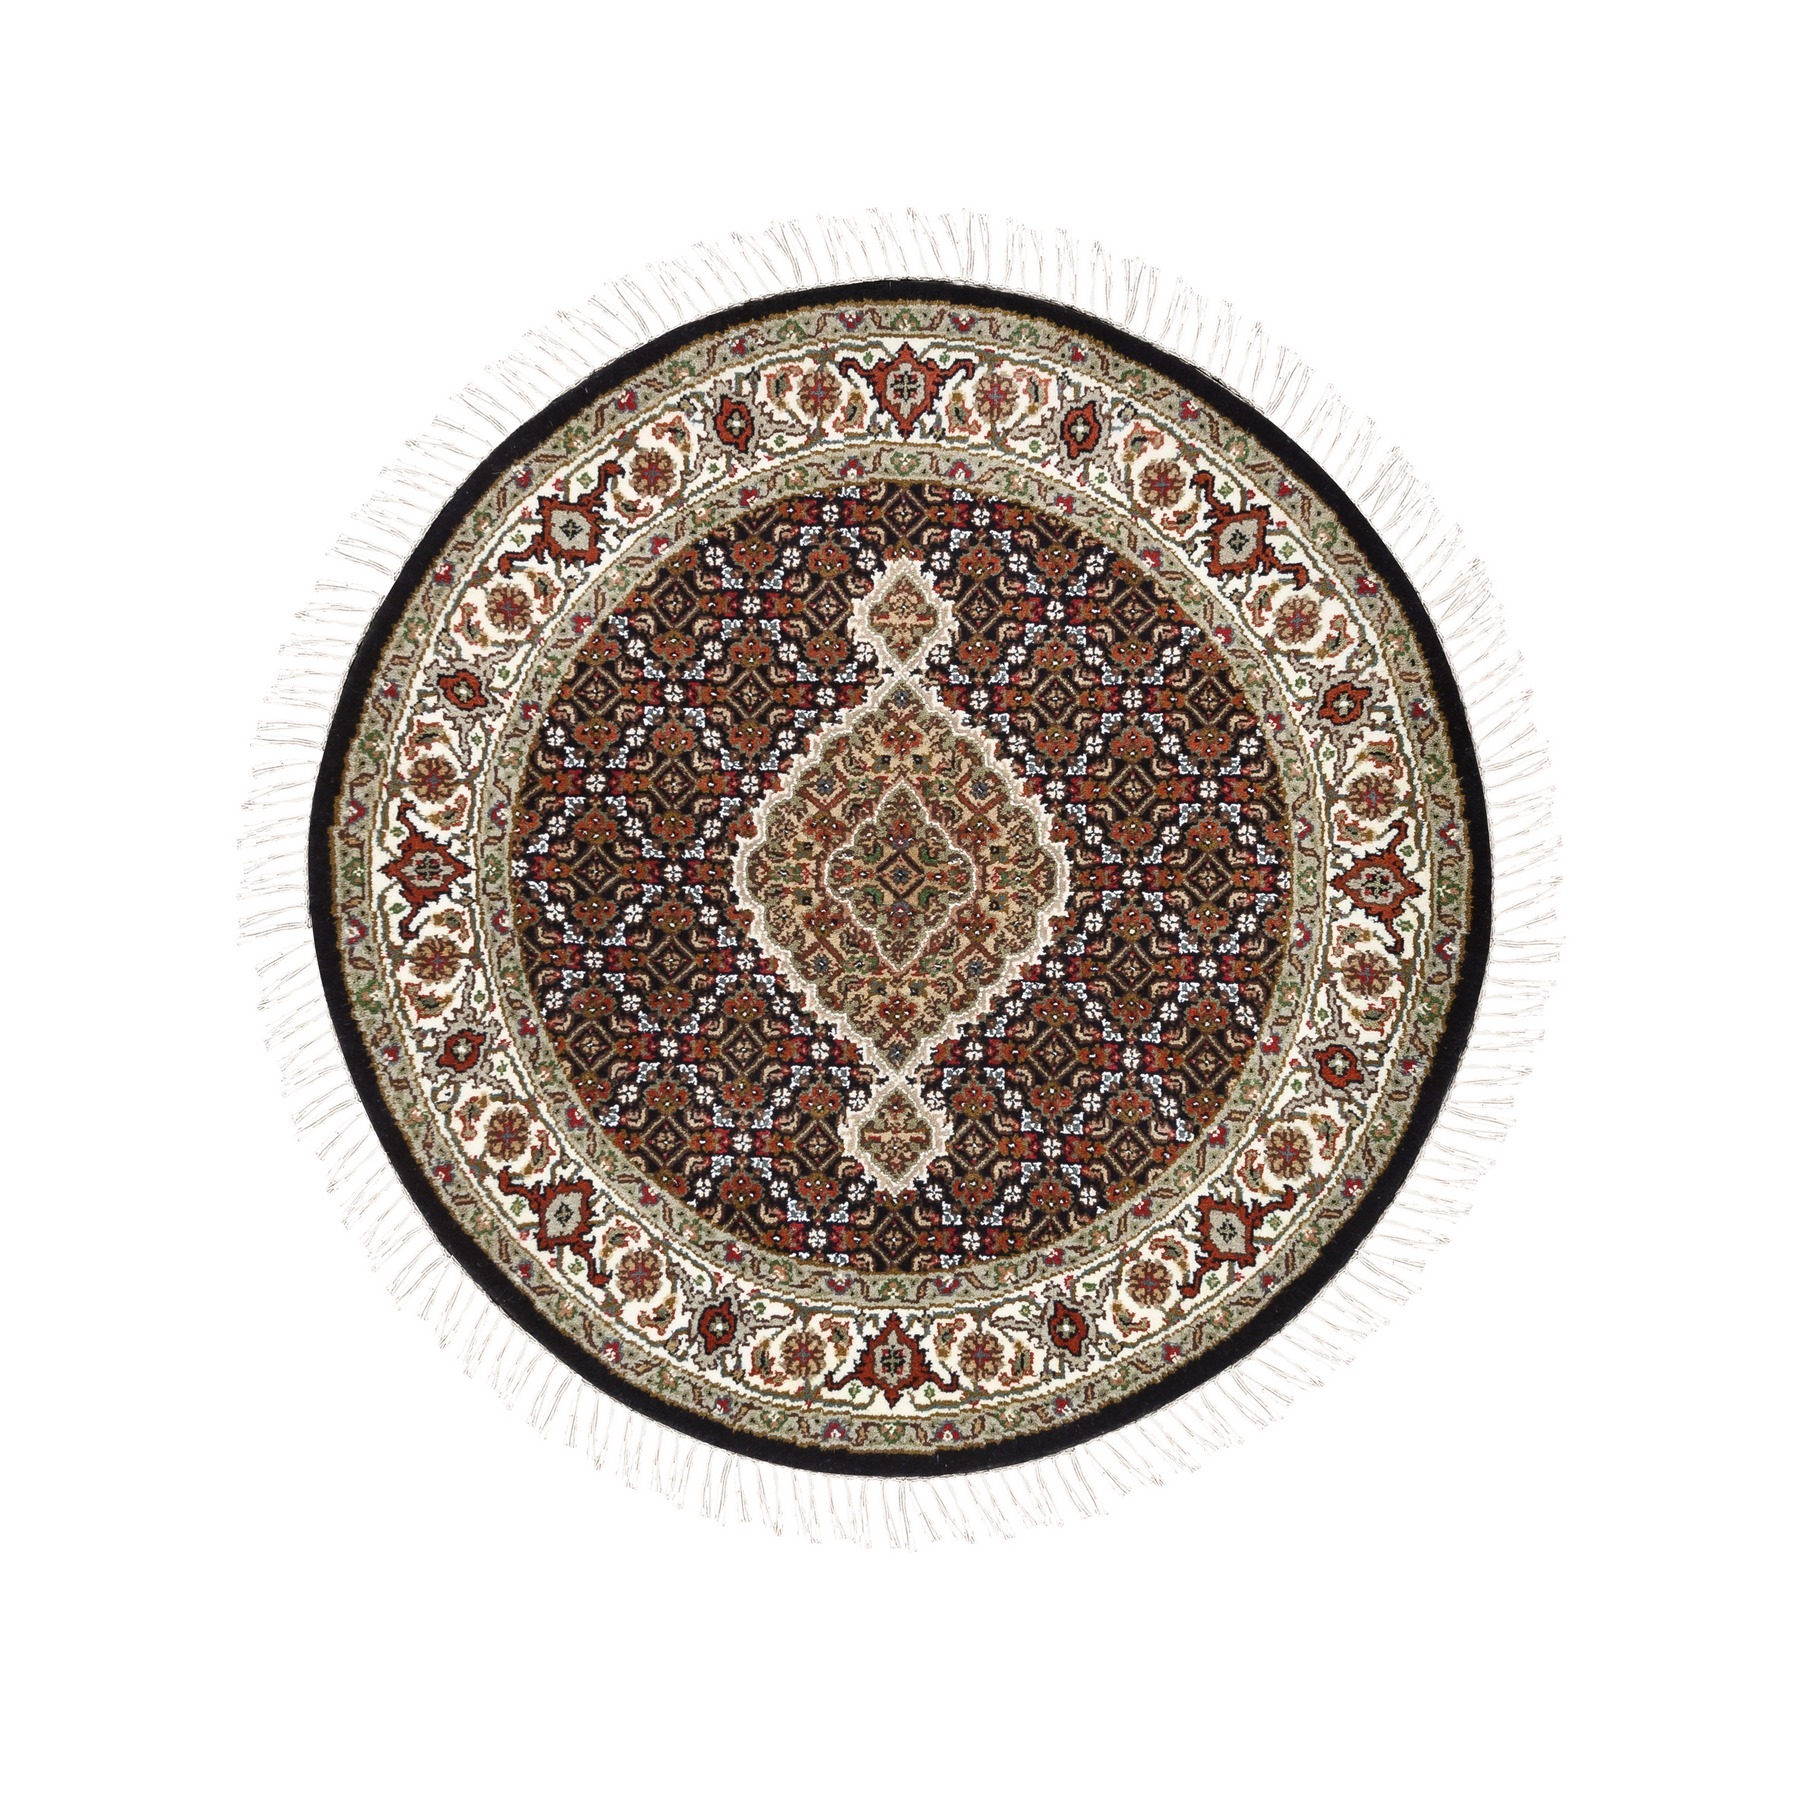 Pirniakan Collection Hand Knotted Black Rug No: 1124902